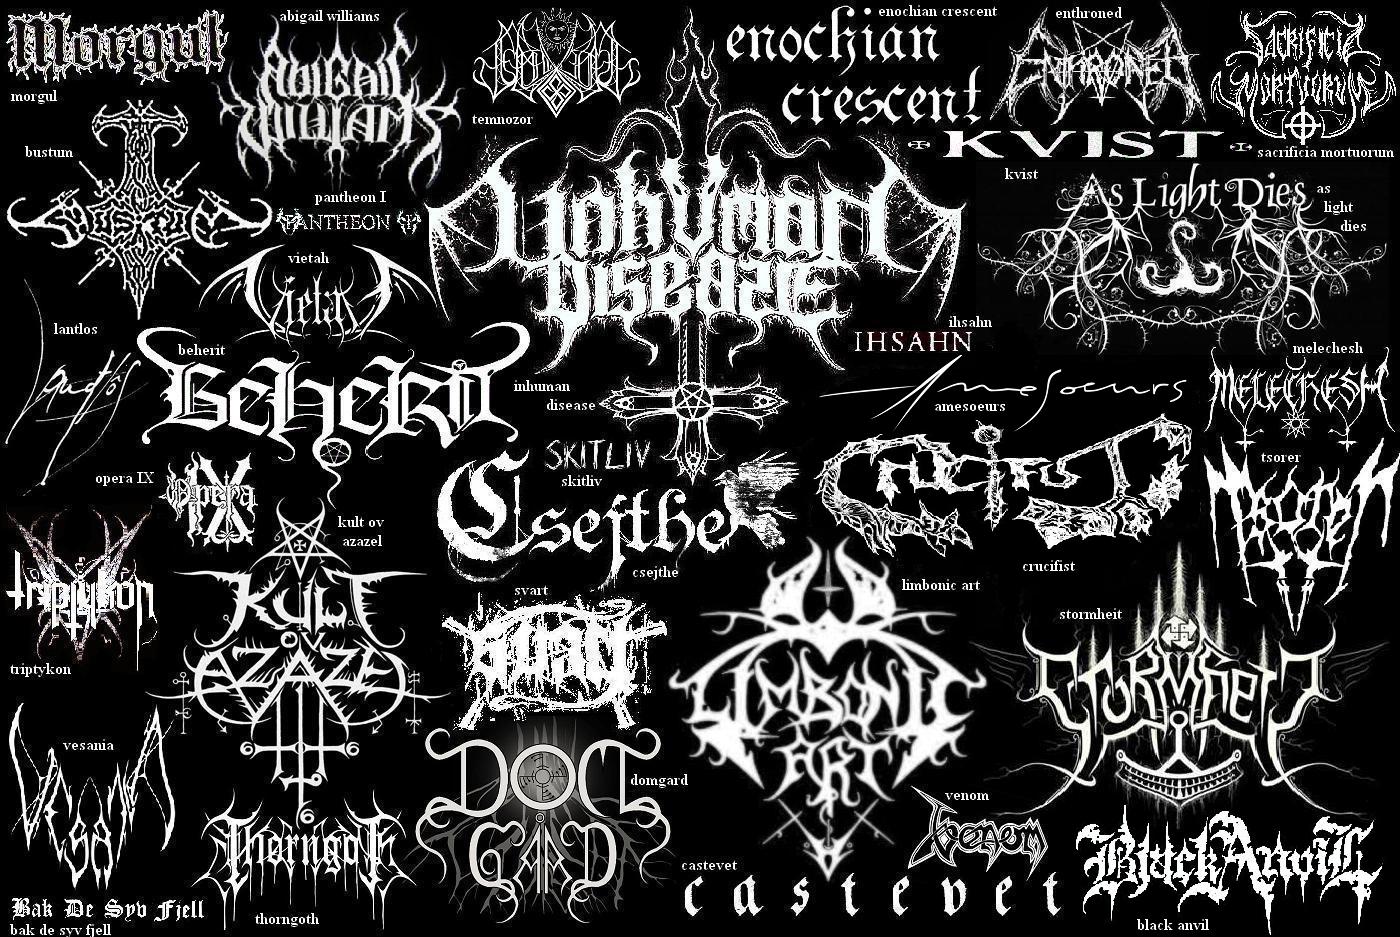 Black Metal Bands Images And Quotes Quotesgram